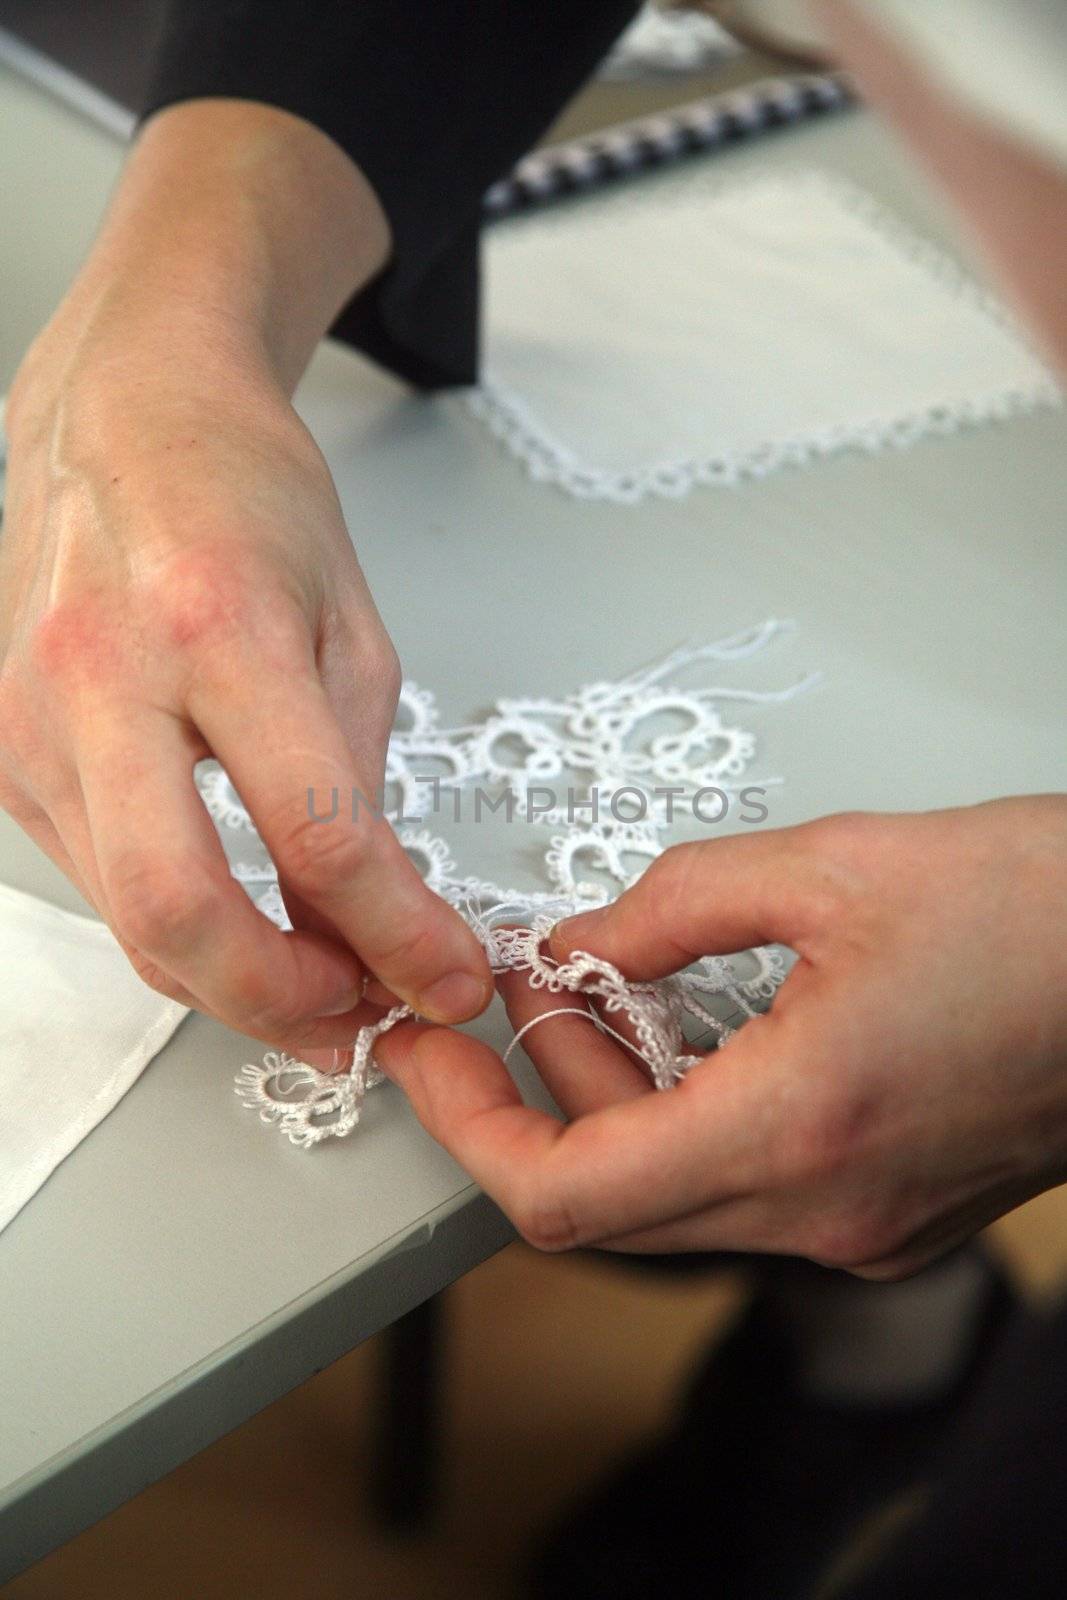 Process of lace-making by atlas